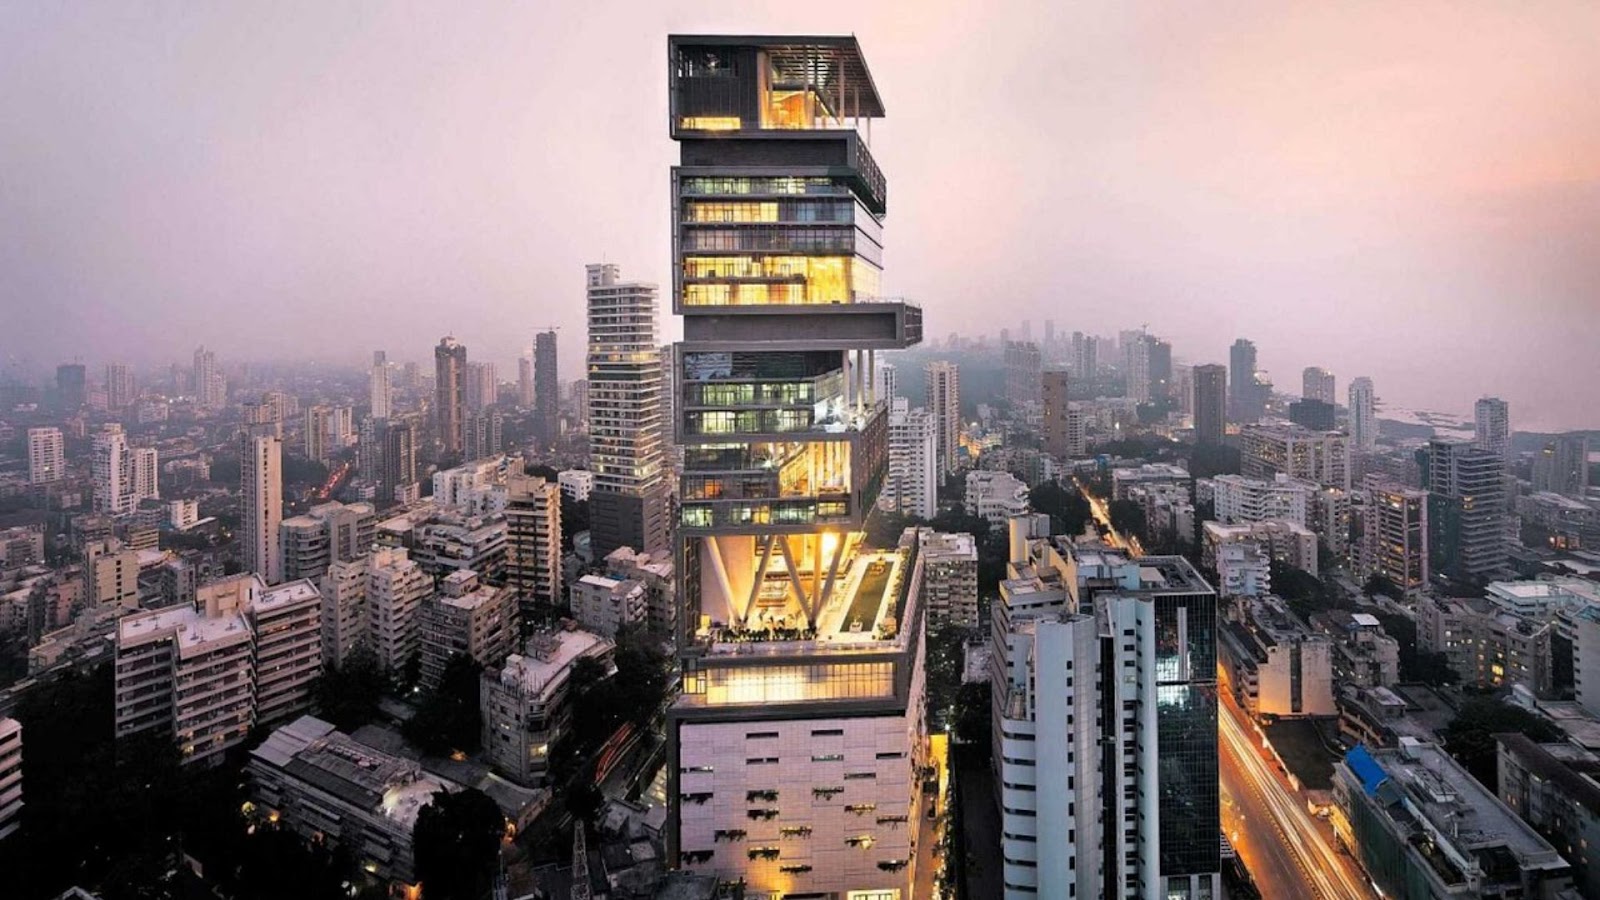 Antilia belongs to one of the top 10 most expensive houses in India.